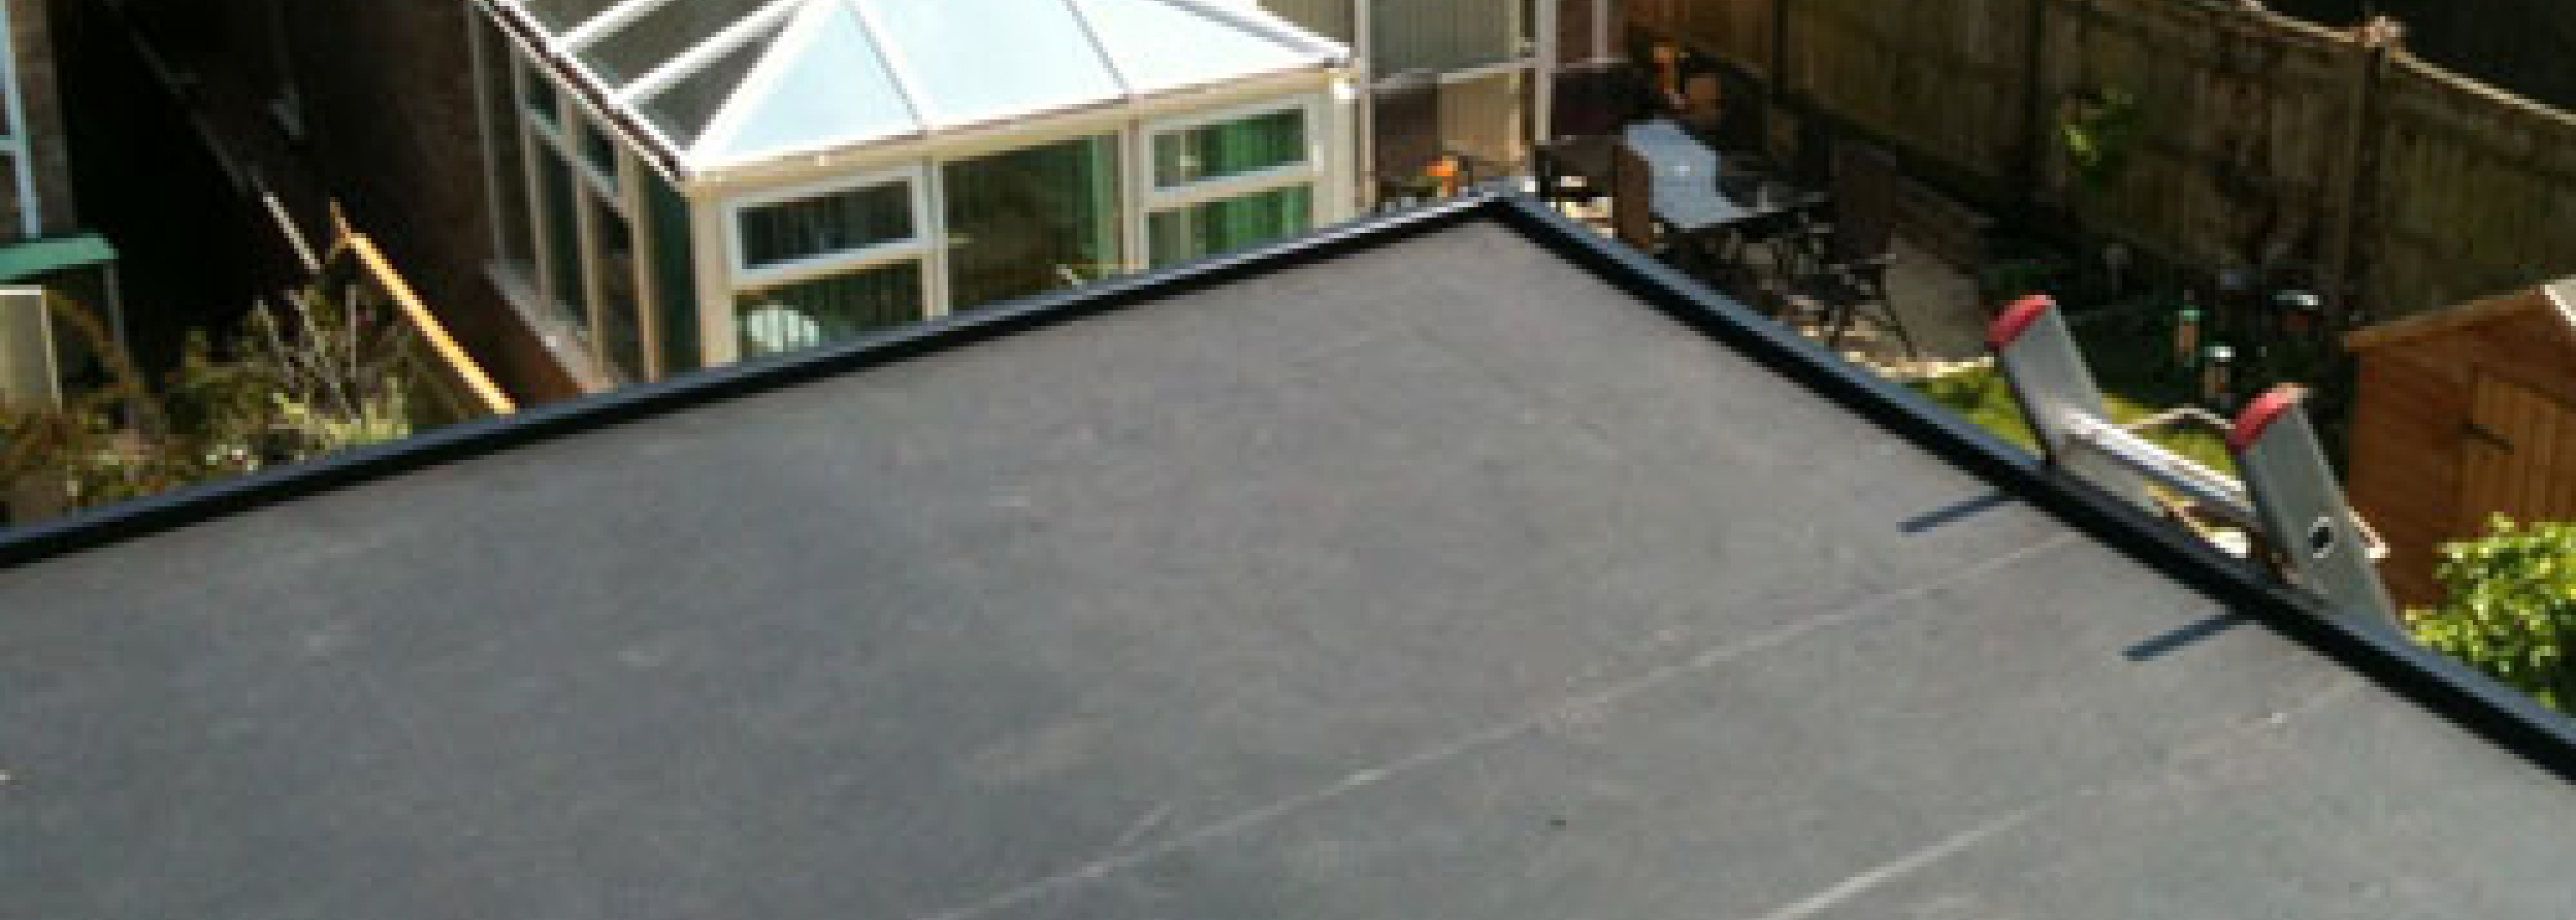 FLAT ROOF REPLACEMENT